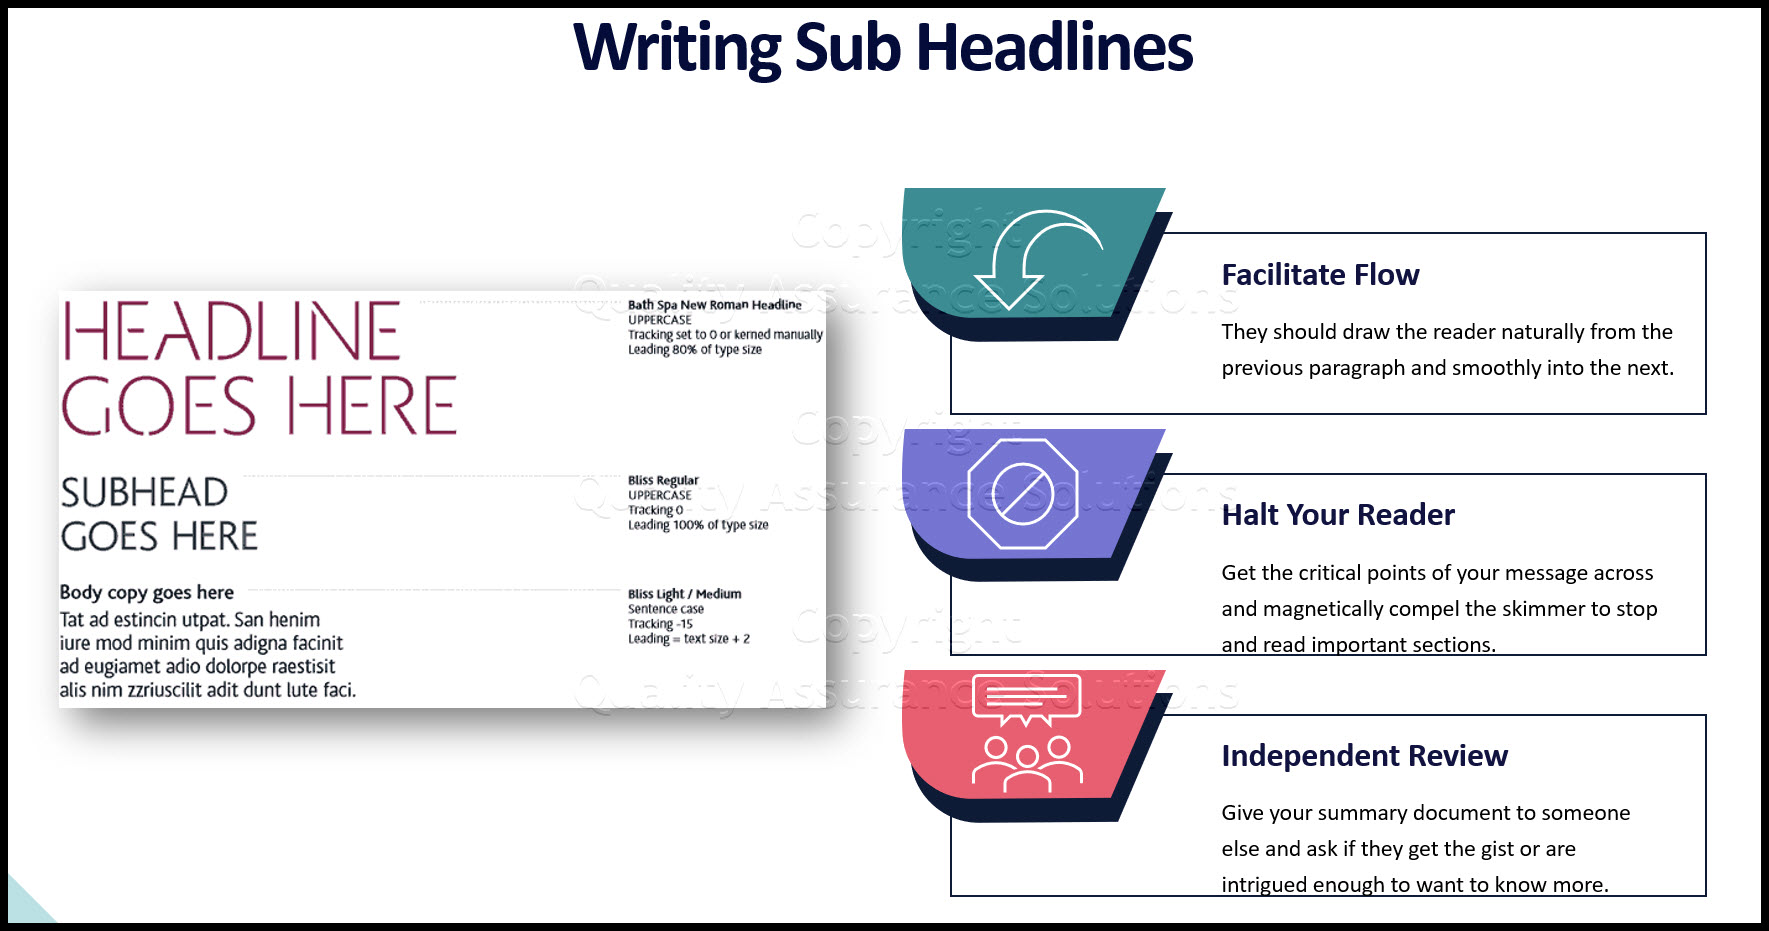 Tricks to writing subheads. How to deliver your message with a subhead. 